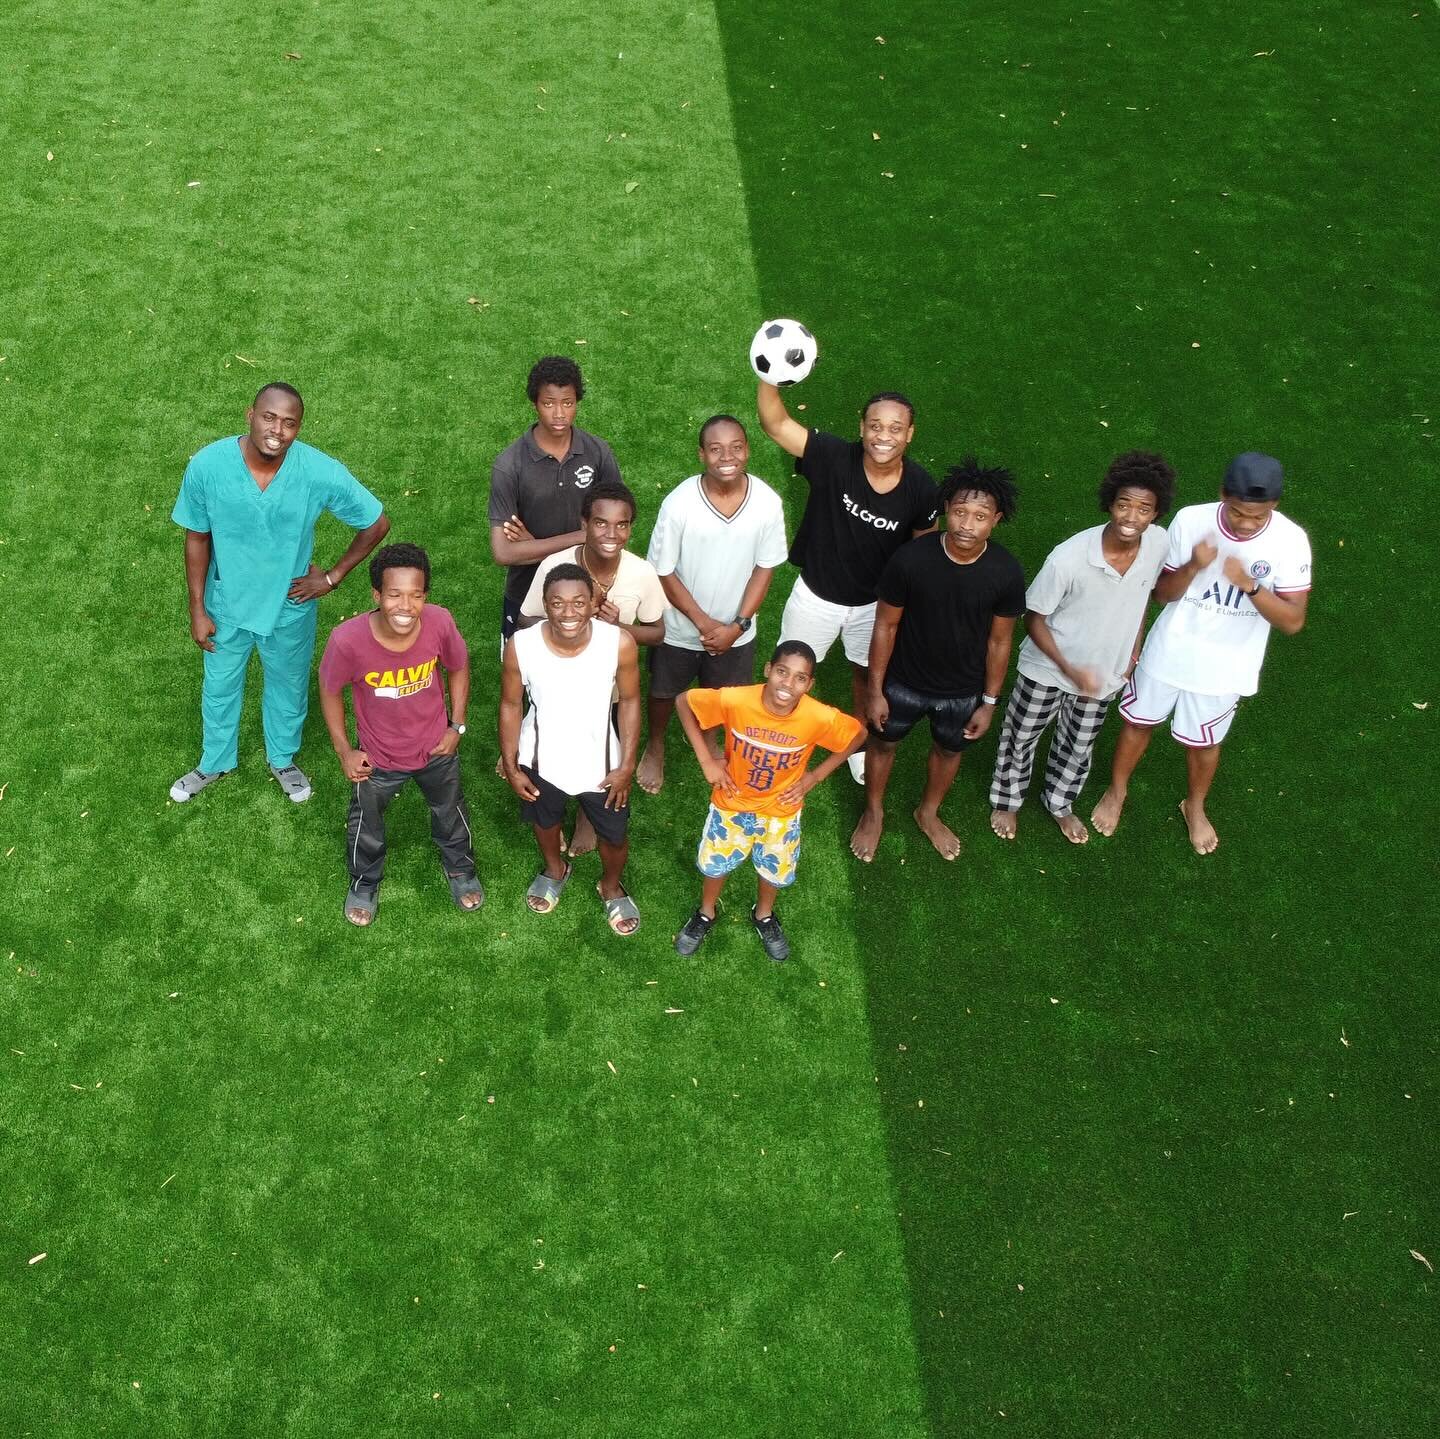 In 2023, T&ordm;Cool Infill was fortunate to partner with @mitchalbom and @synlawnmichigan on a synthetic turf installation at the Have Faith Haiti Orphanage in Port-au-Prince, Haiti. The SYNLawn Michigan team installed 17,000 square feet of turf, in